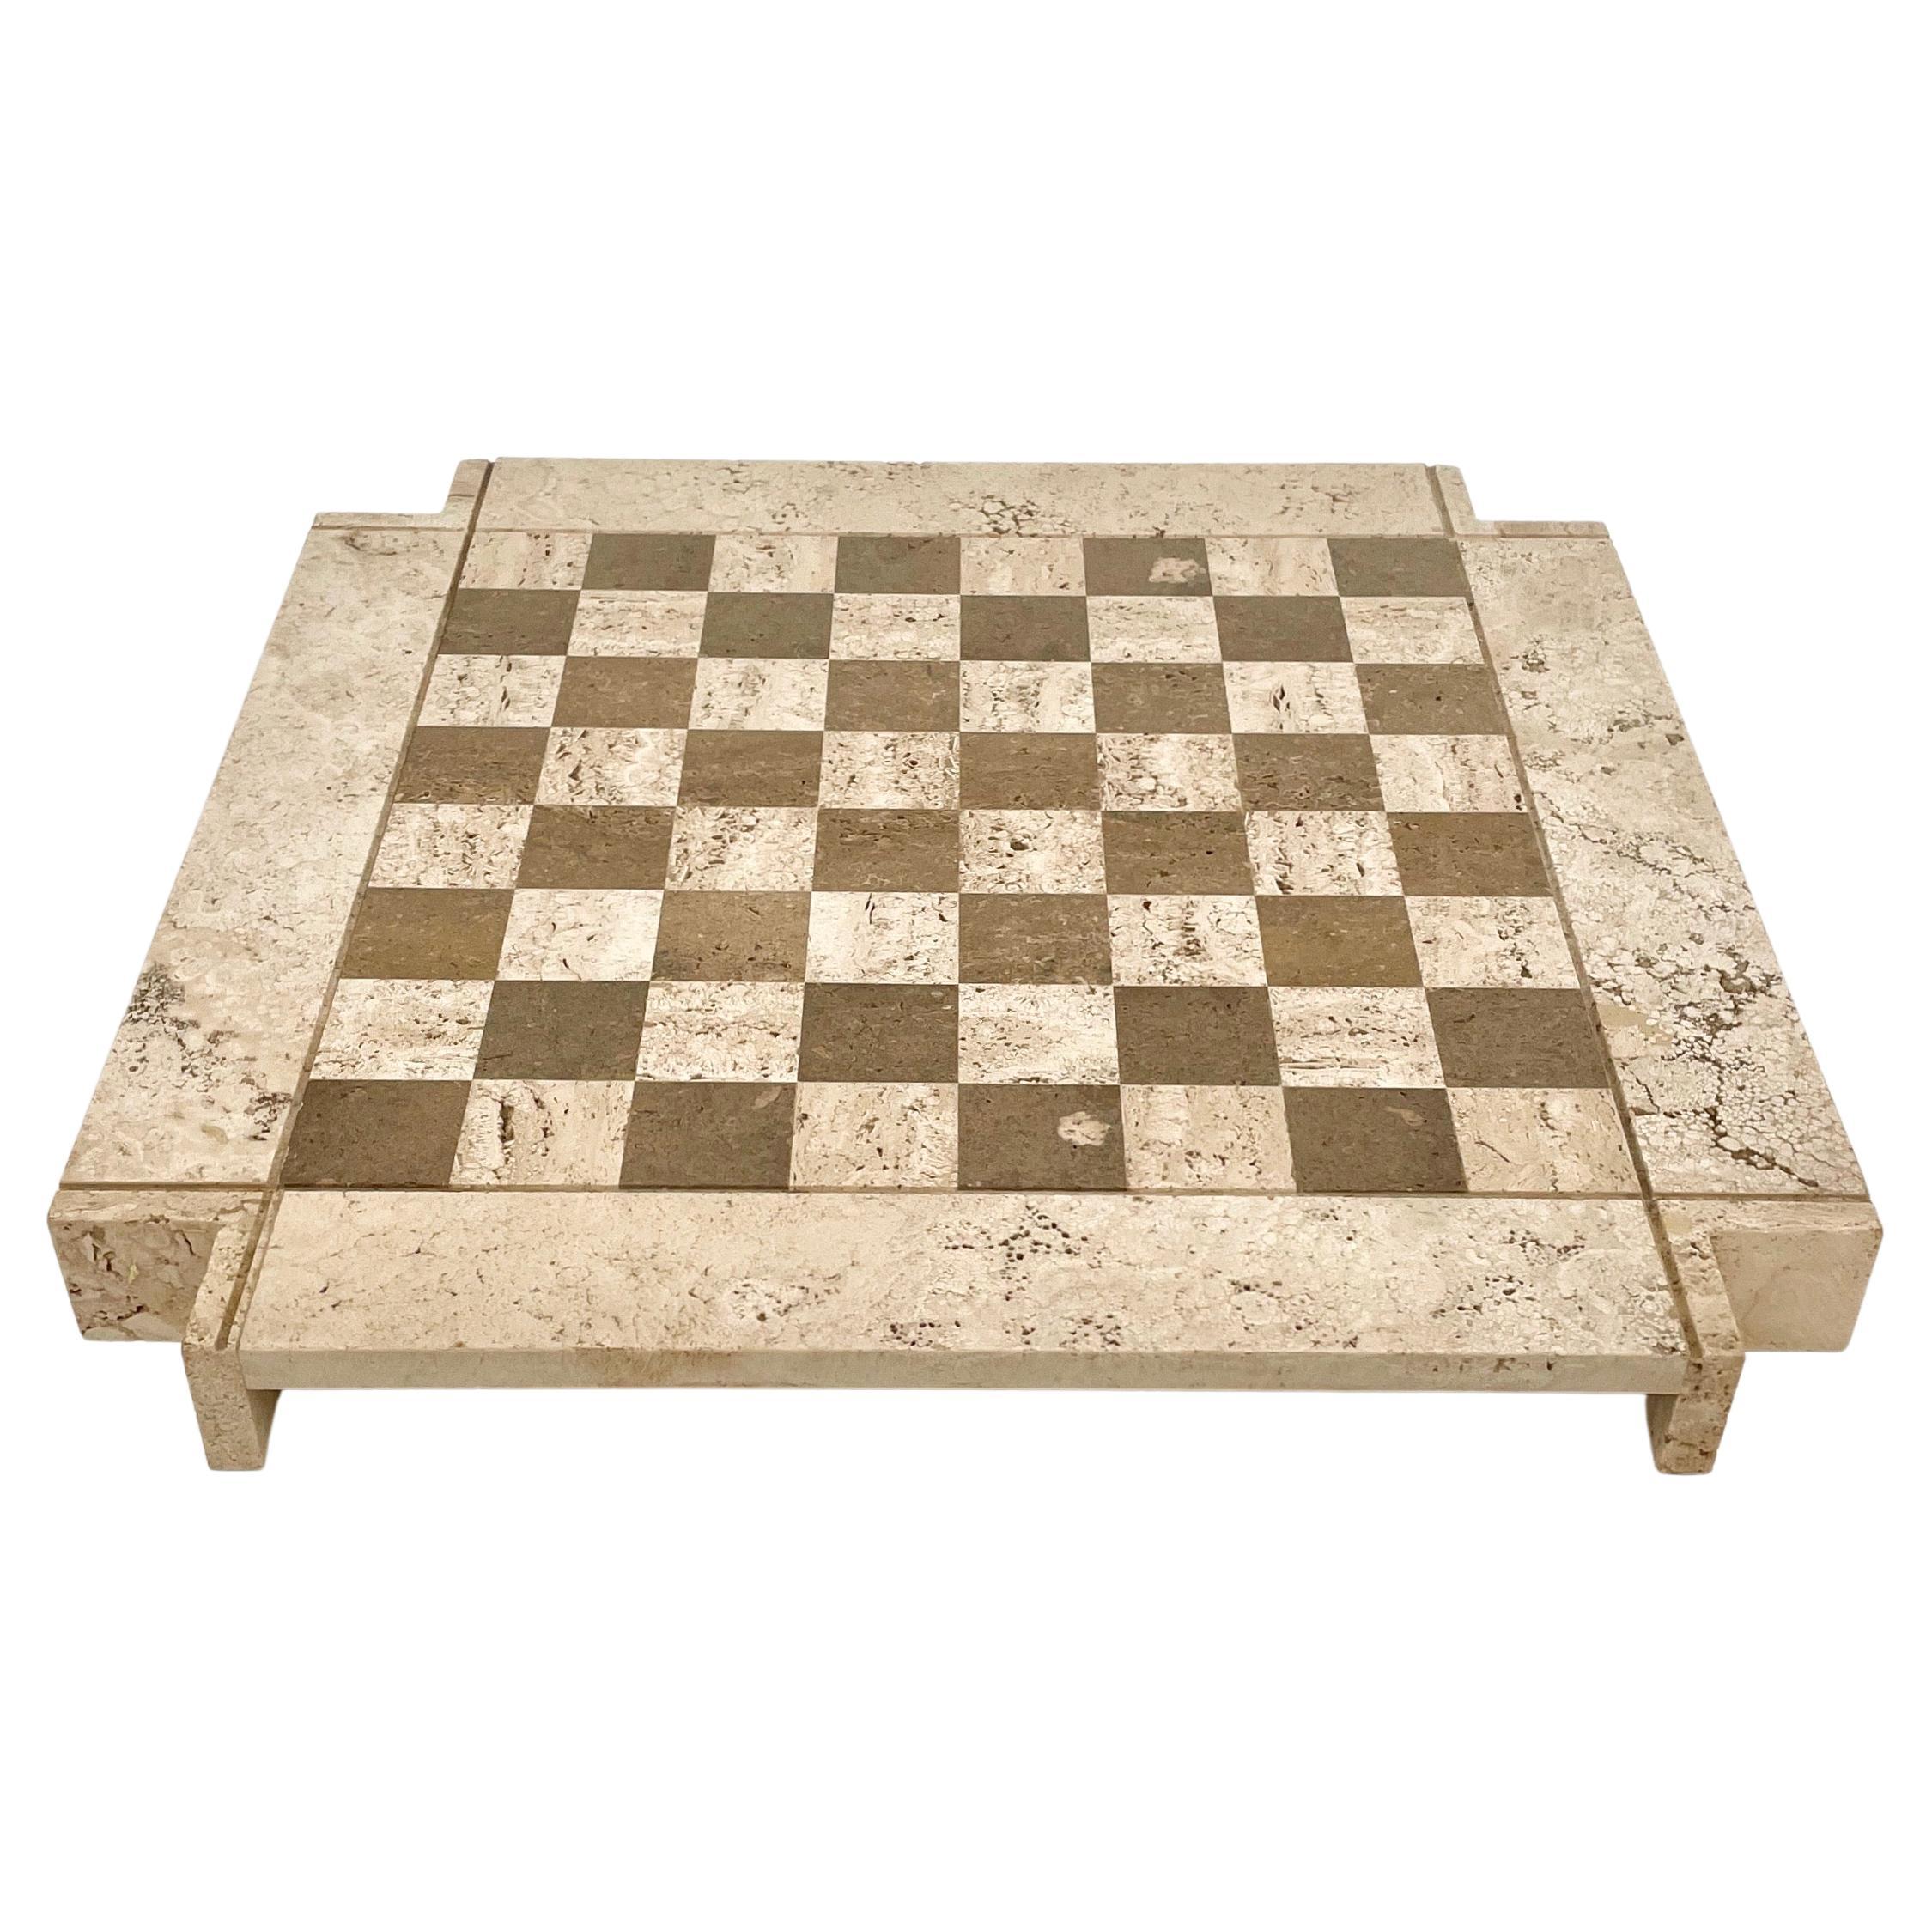 Bicolor Travertine Chess Game Angelo Mangiarotti Style, Italy, 1970s For Sale